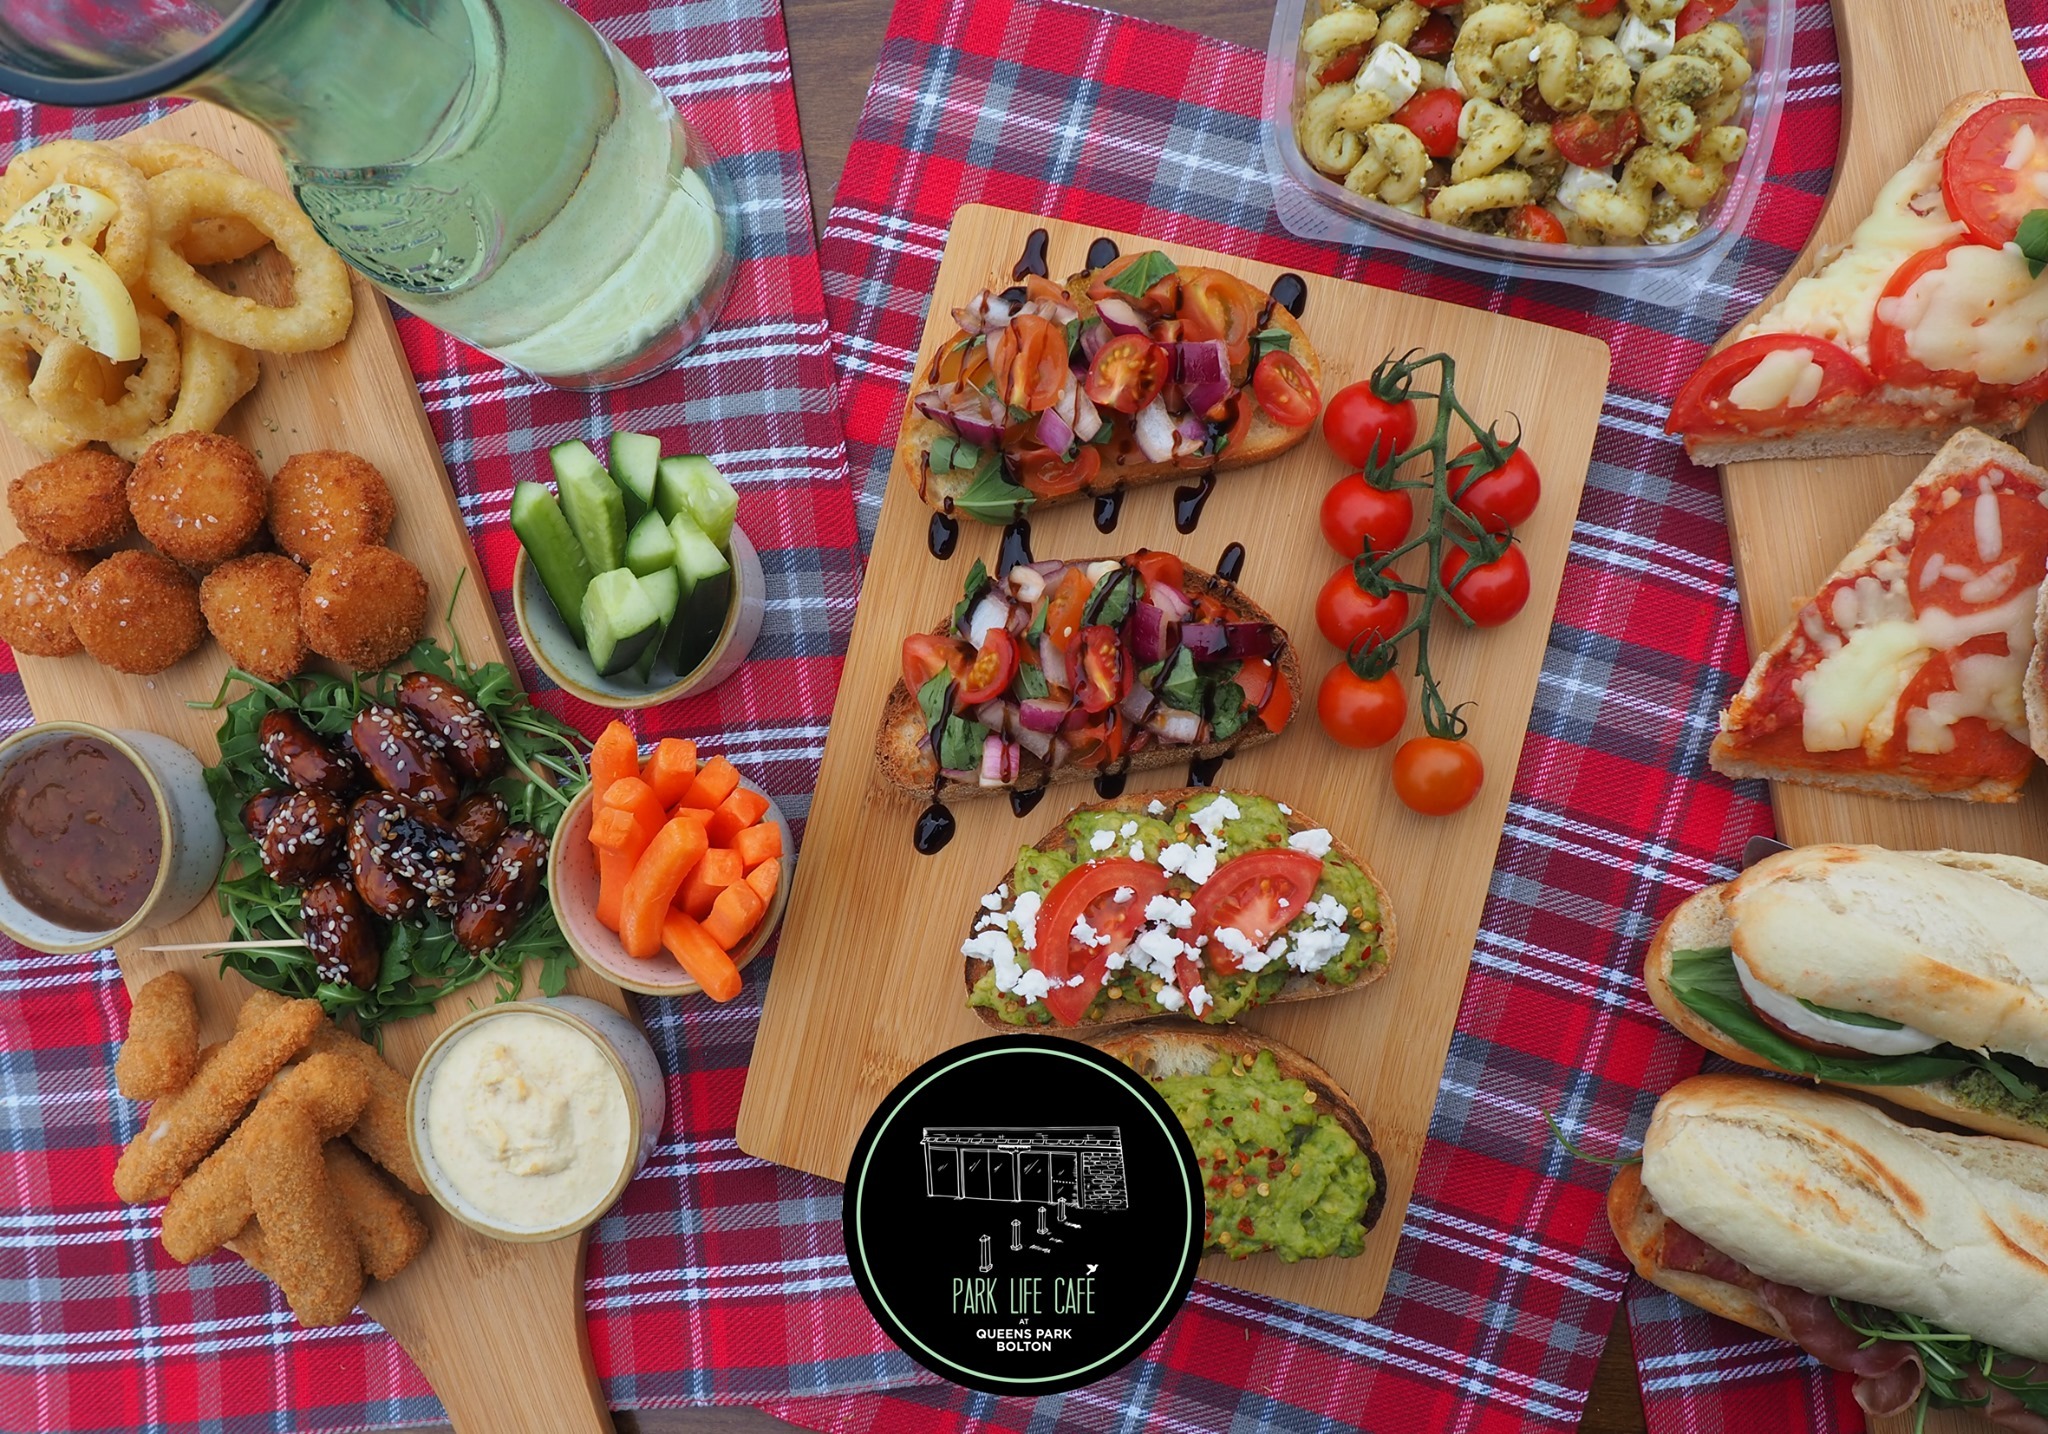 The Picnic in the Park range includes sticky cocktail sausages and bruschetta